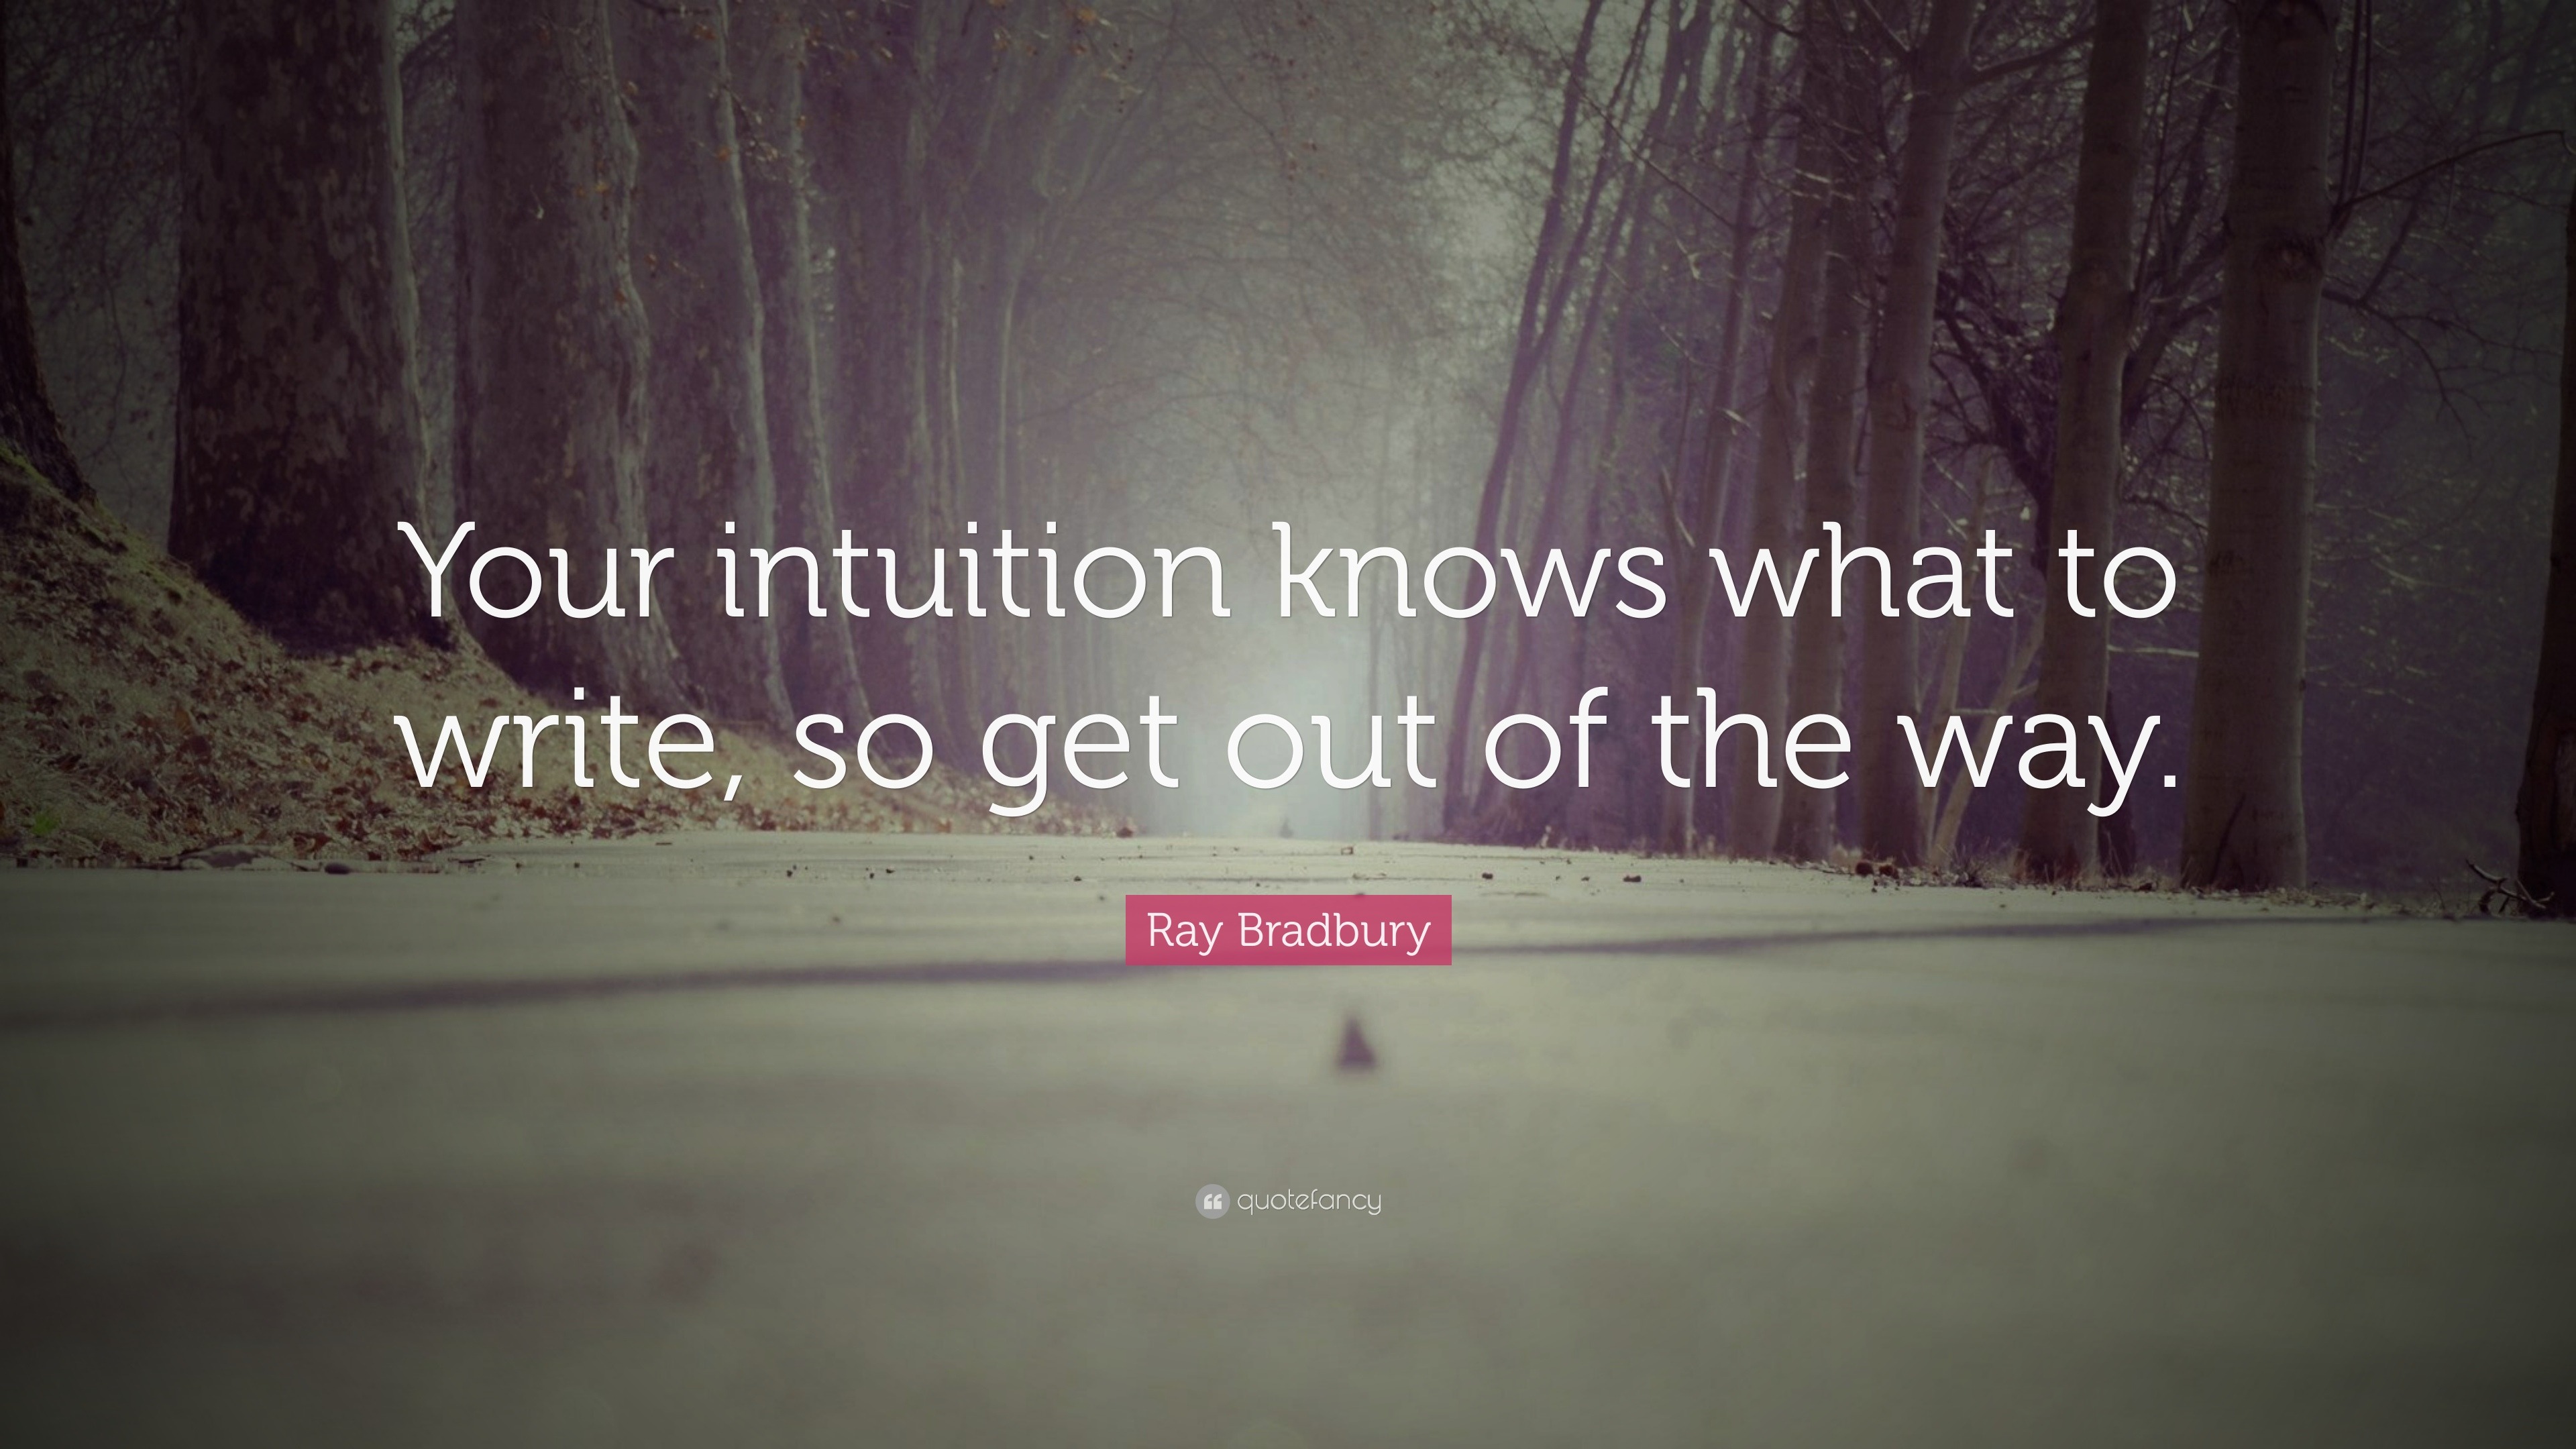 Ray Bradbury Quote: “Your intuition knows what to write, so get